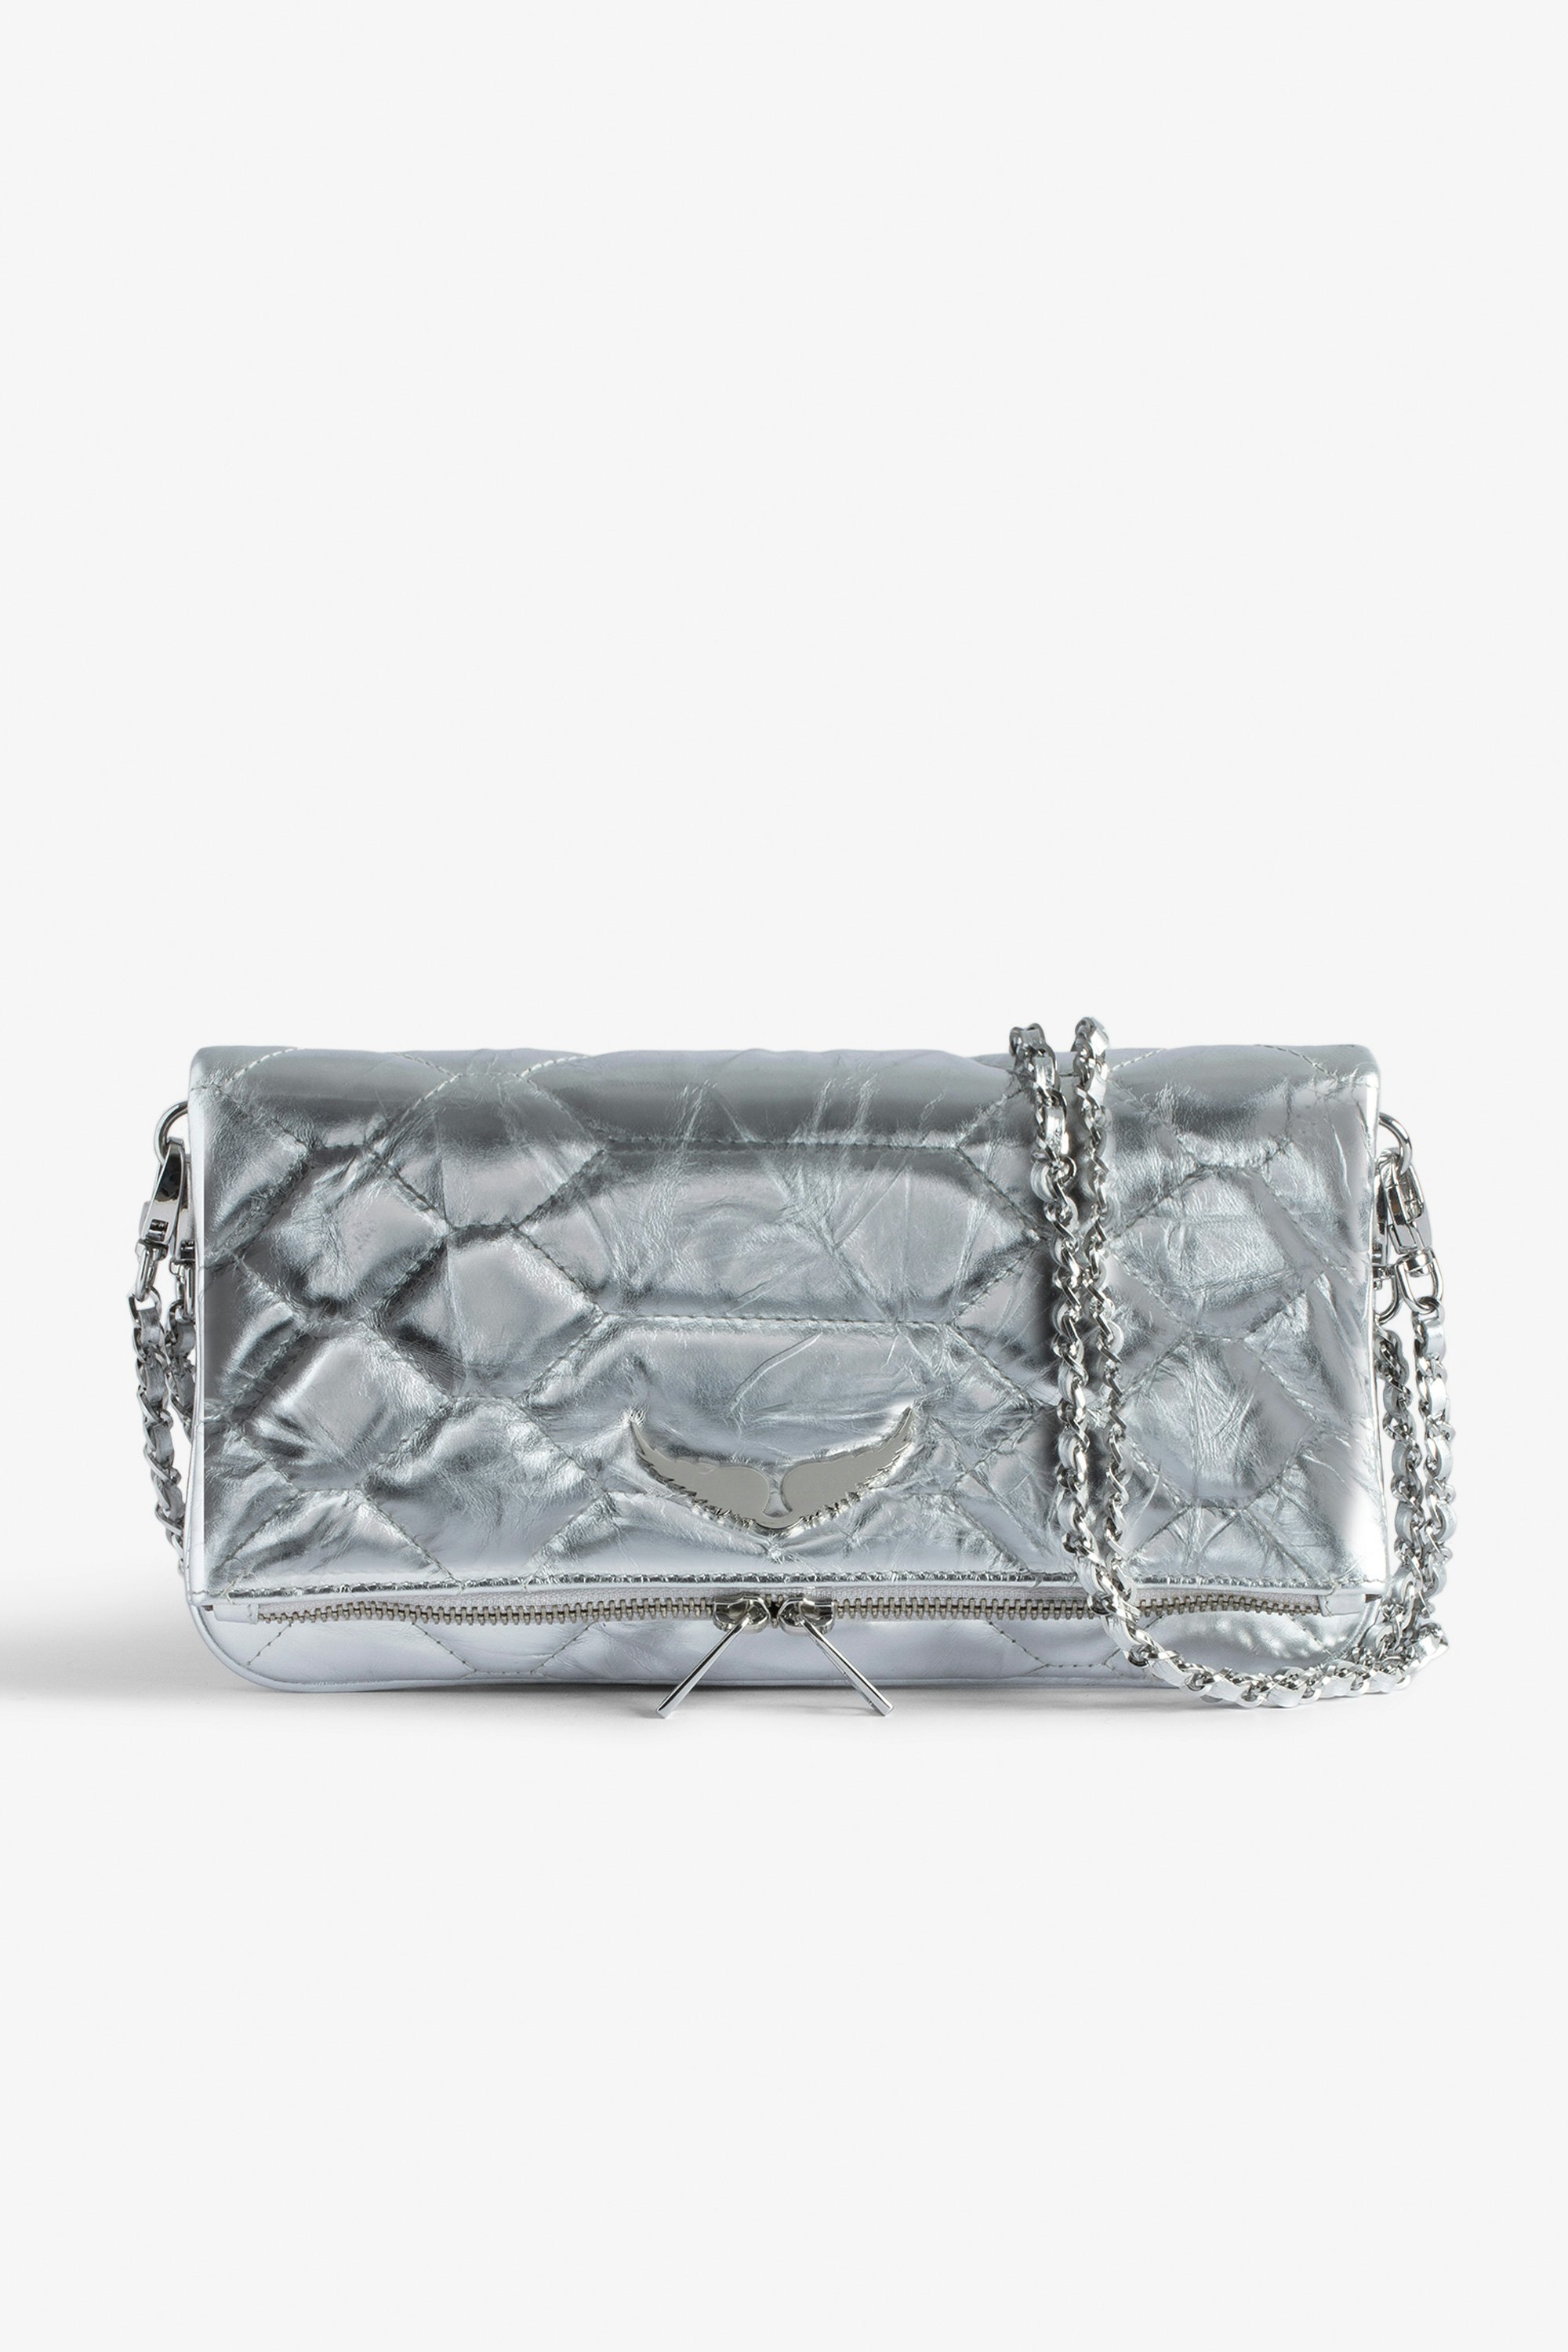 View All Bags  Zadig&Voltaire